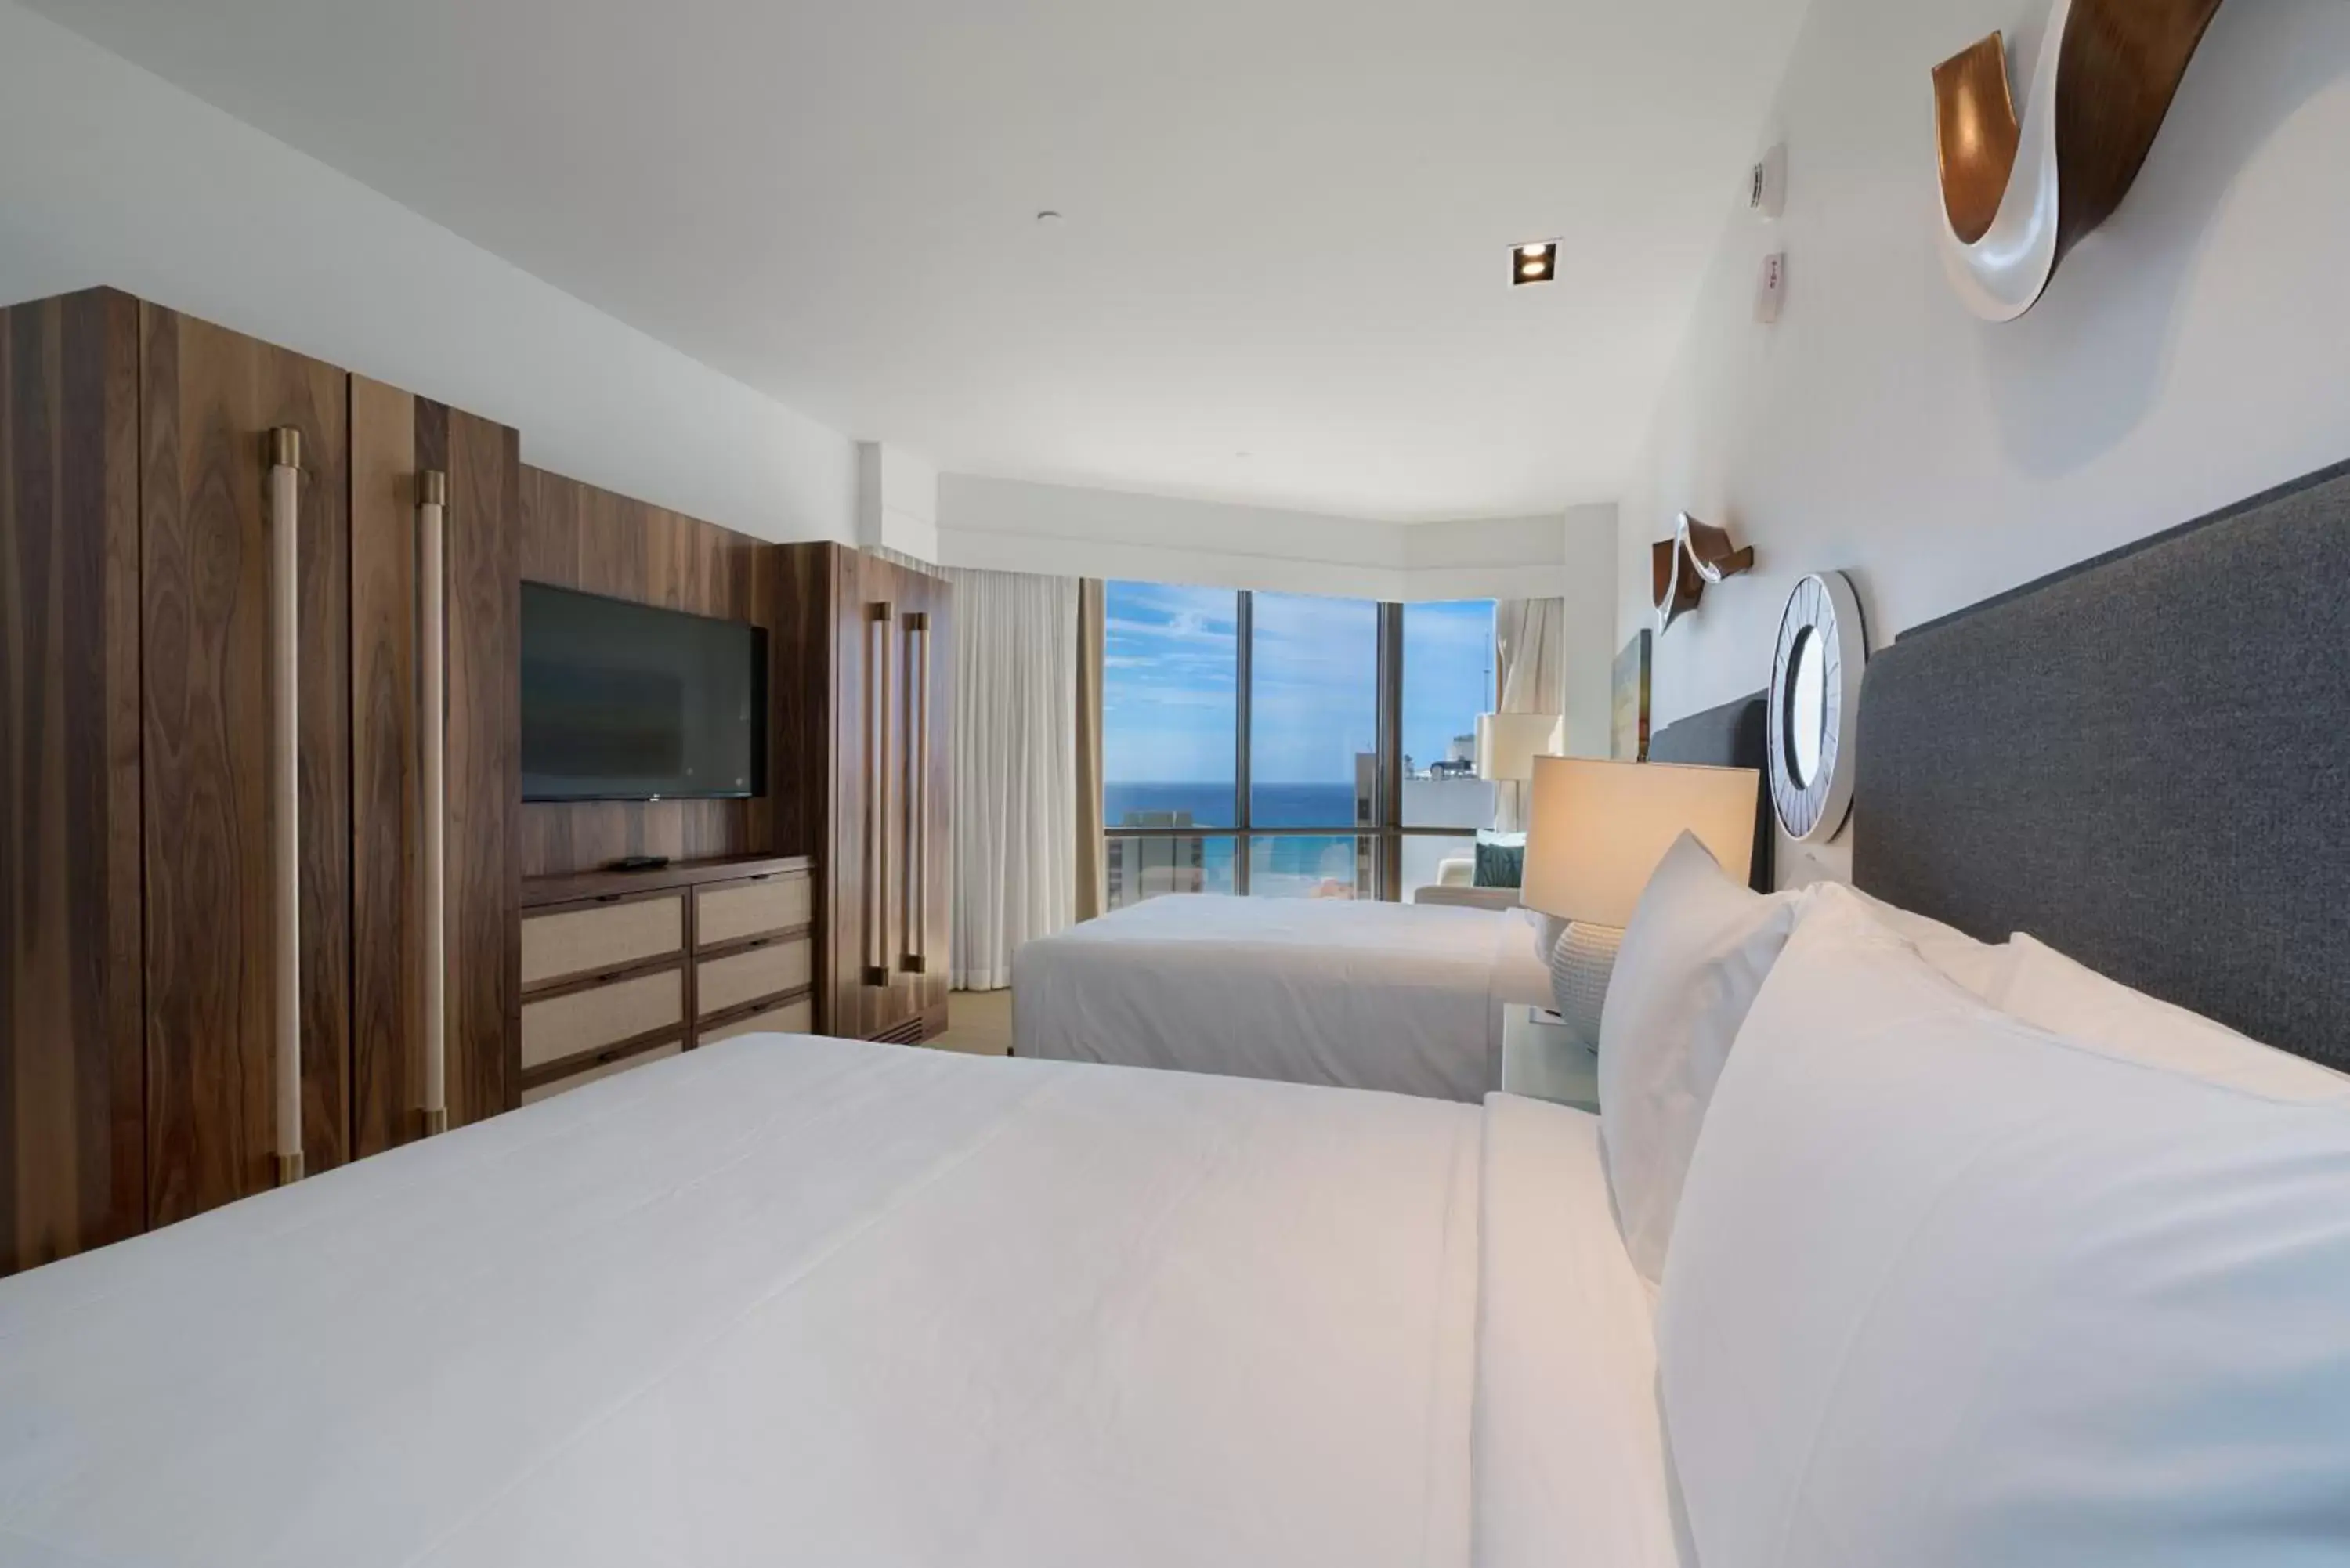 Queen Room with Two Queen Beds and Ocean View in Hyatt Centric Waikiki Beach